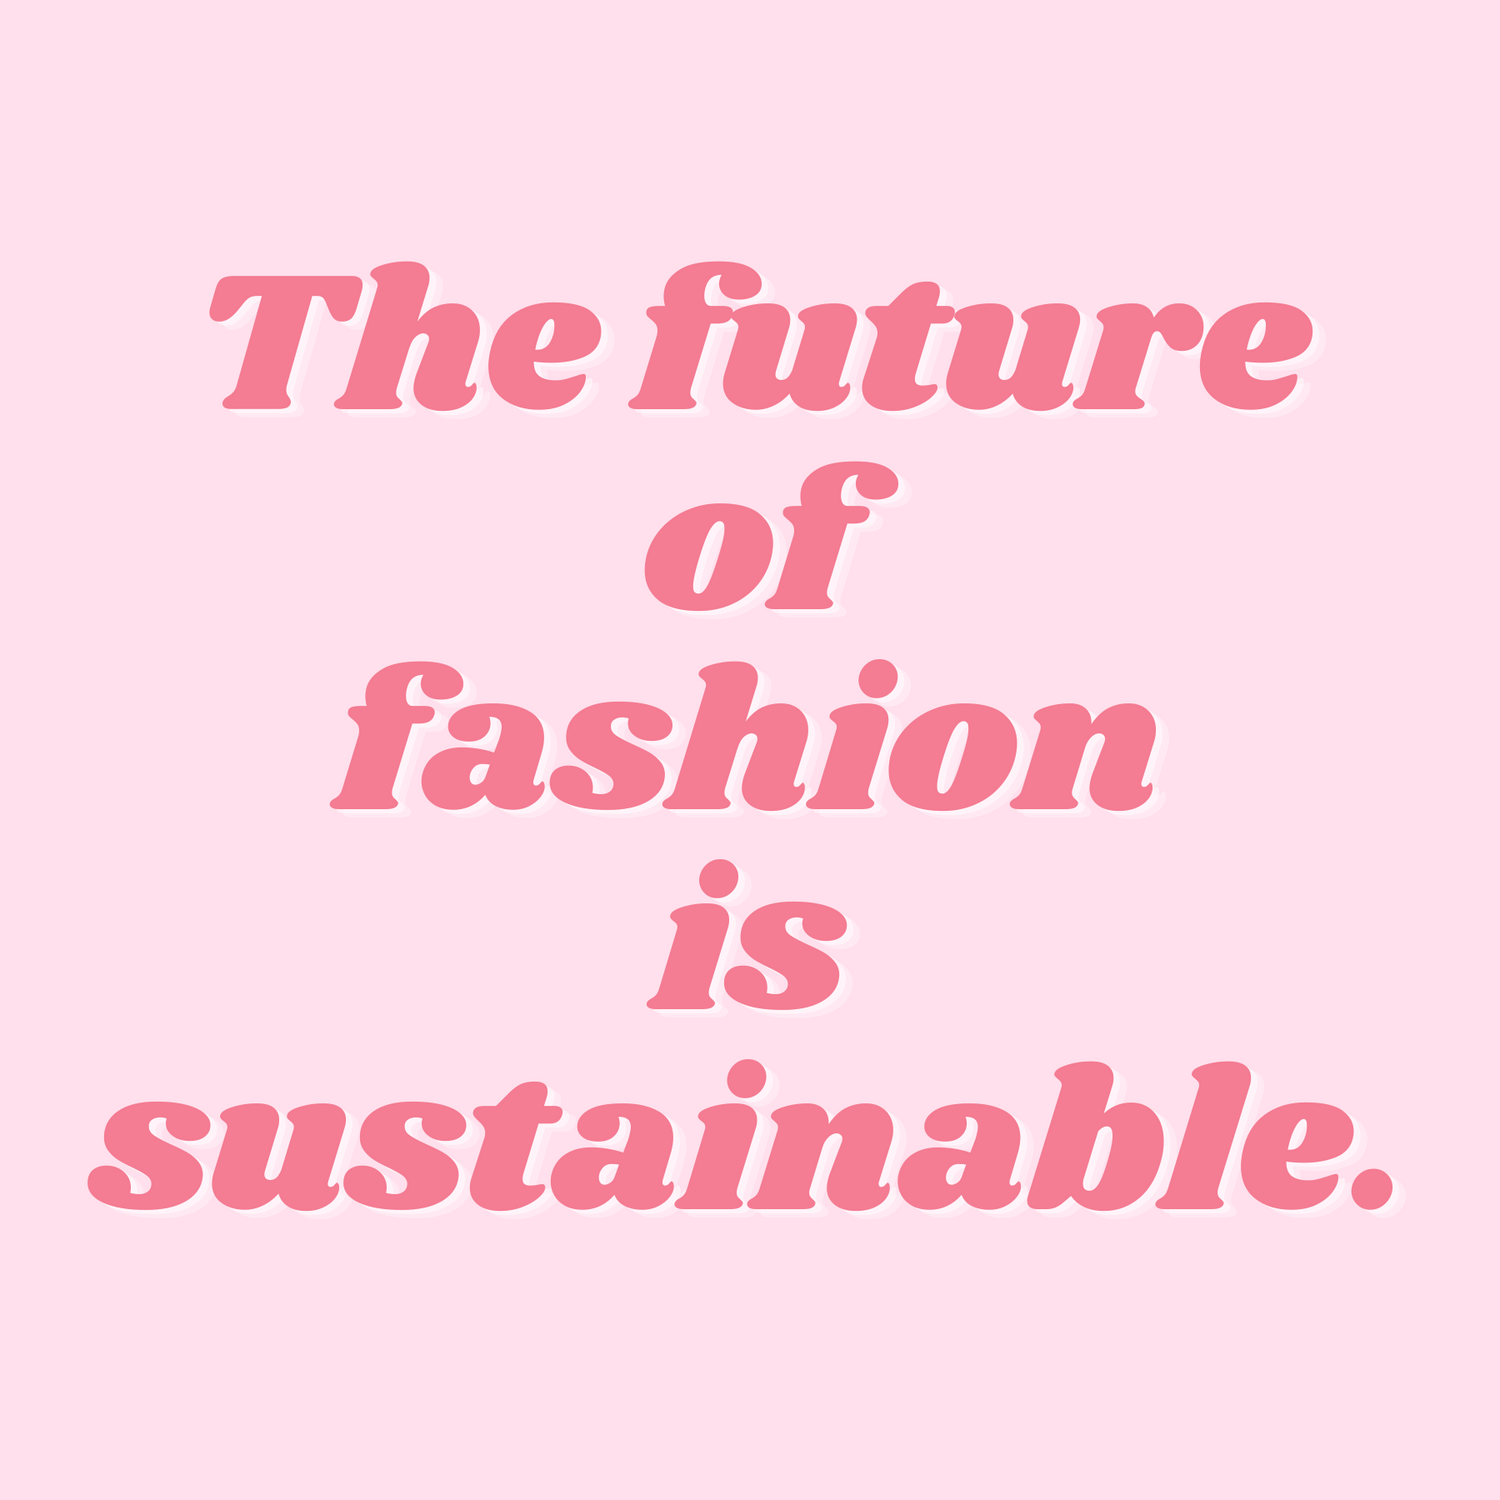 The Fashion Advocate ethical sustainable circular slow fashion brand business mentor online course marketing masterclass purpose profit business strategy 1